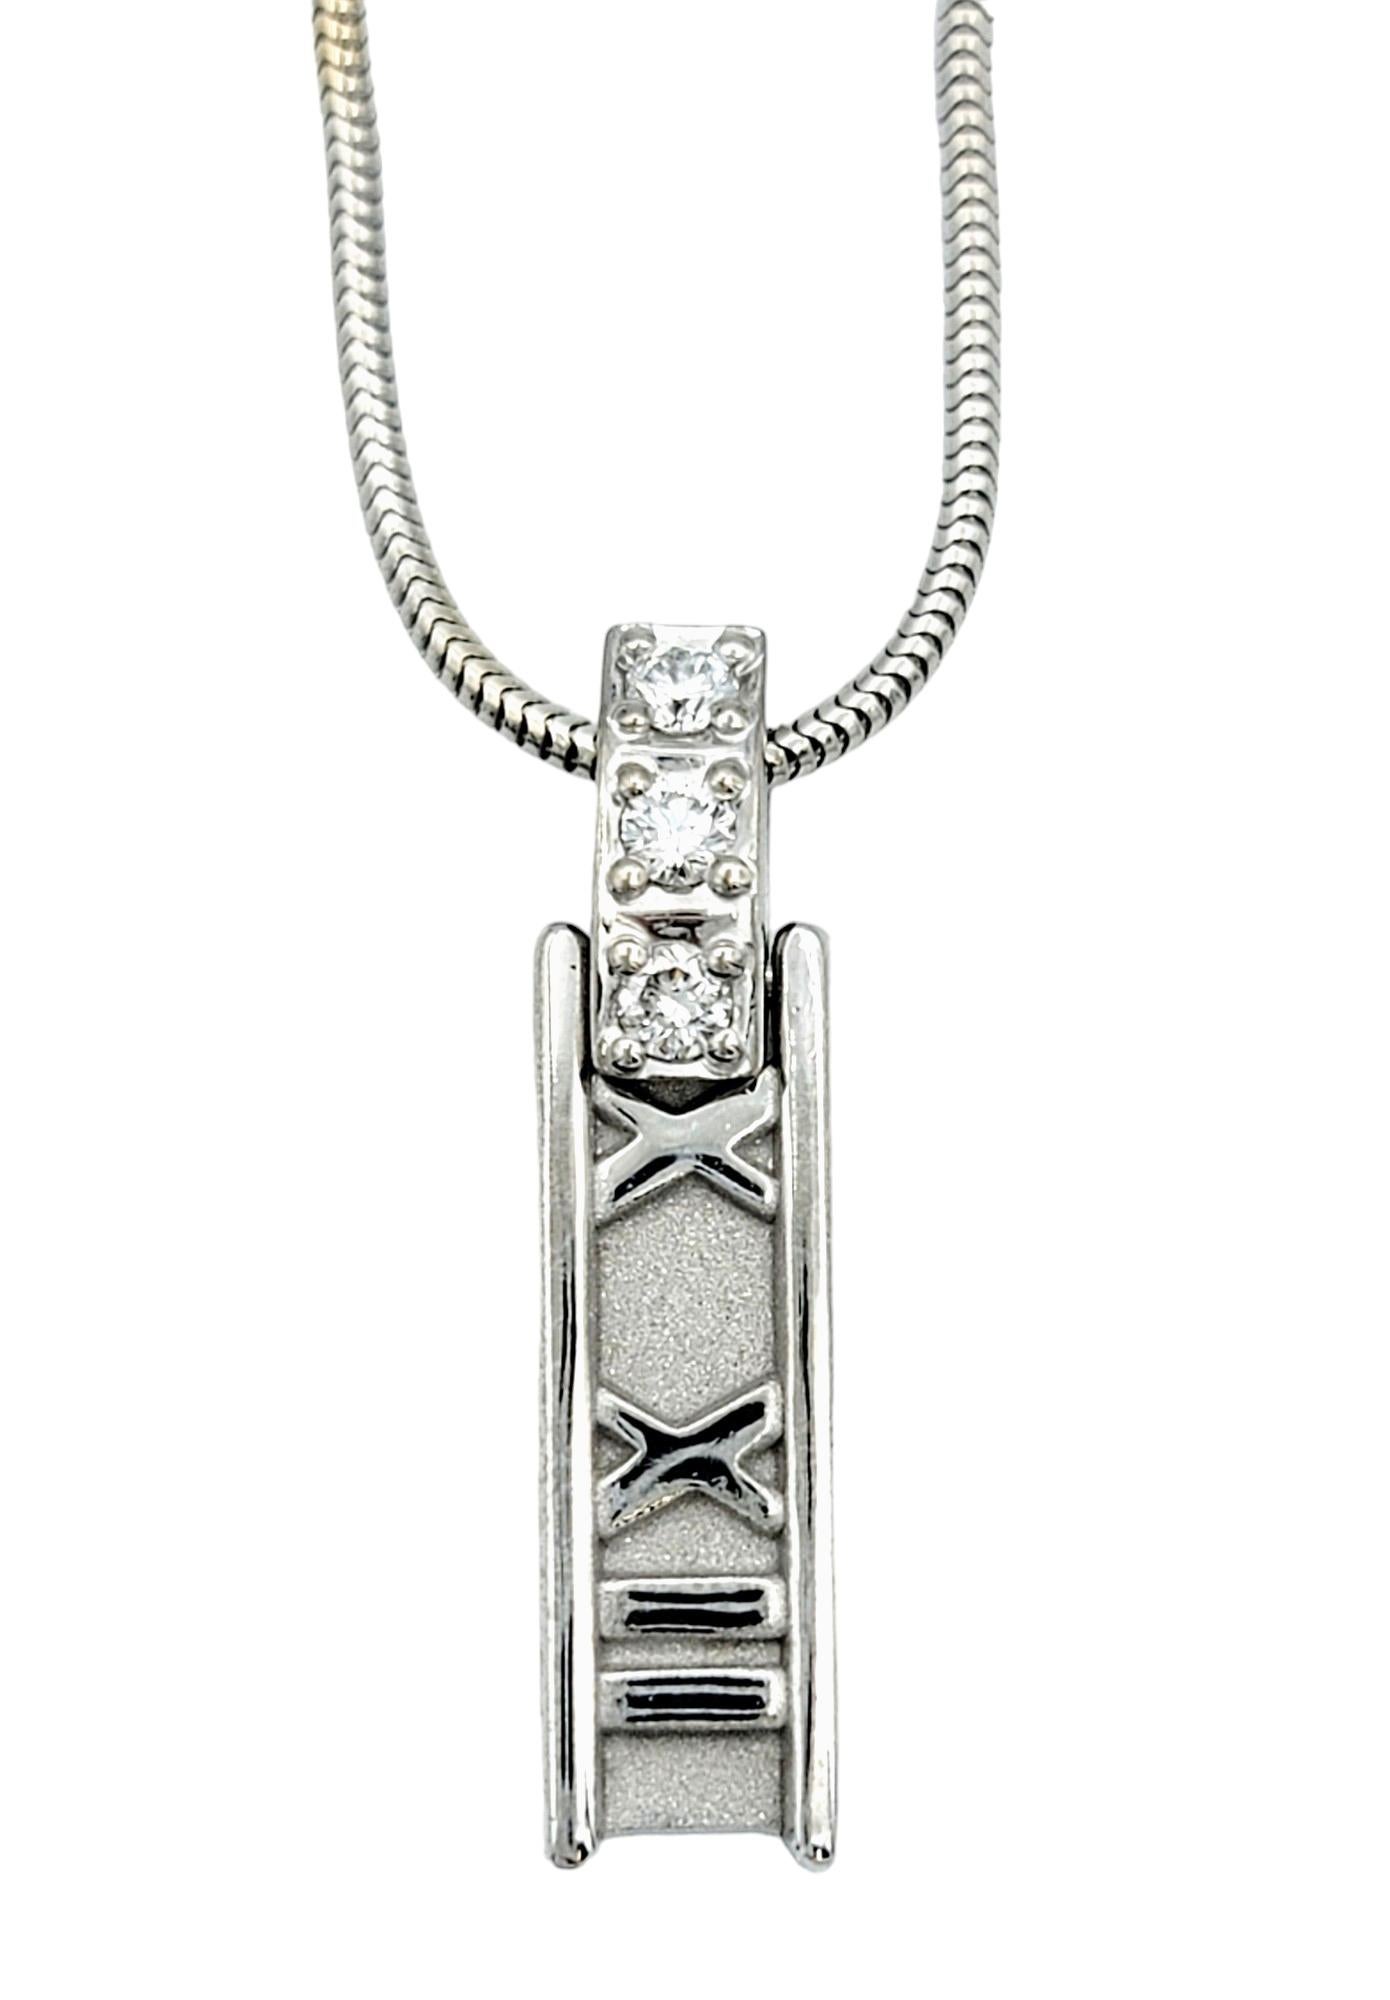 This chic bar necklace from Tiffany & Co. is stylish, modern and versatile. Founded in 1837 in New York City, Tiffany & Co. is one of the world's most storied luxury design houses recognized globally for its innovative jewelry design, extraordinary